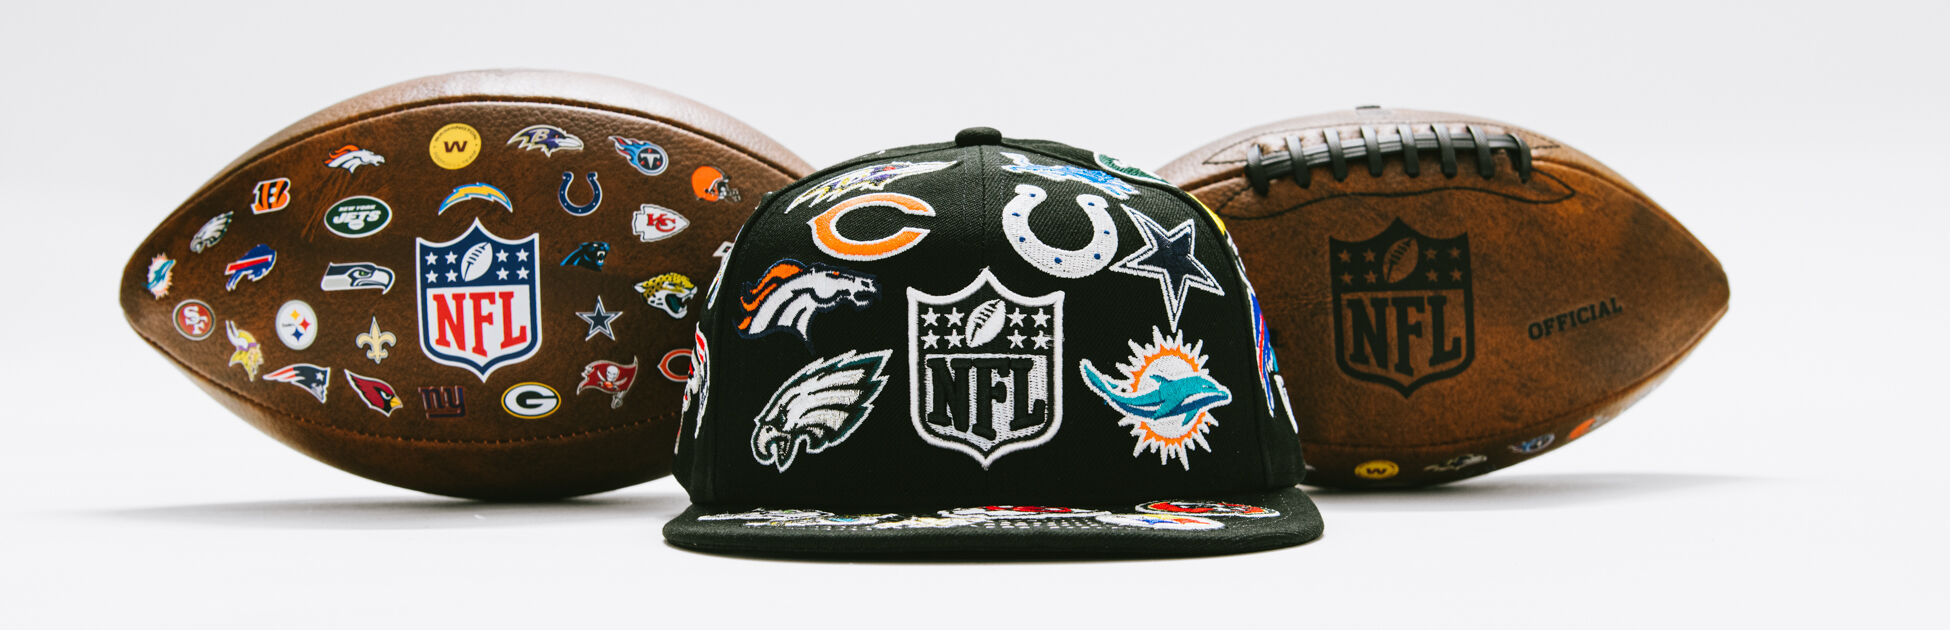 NFL SHOP high-quality products available at KICKZ